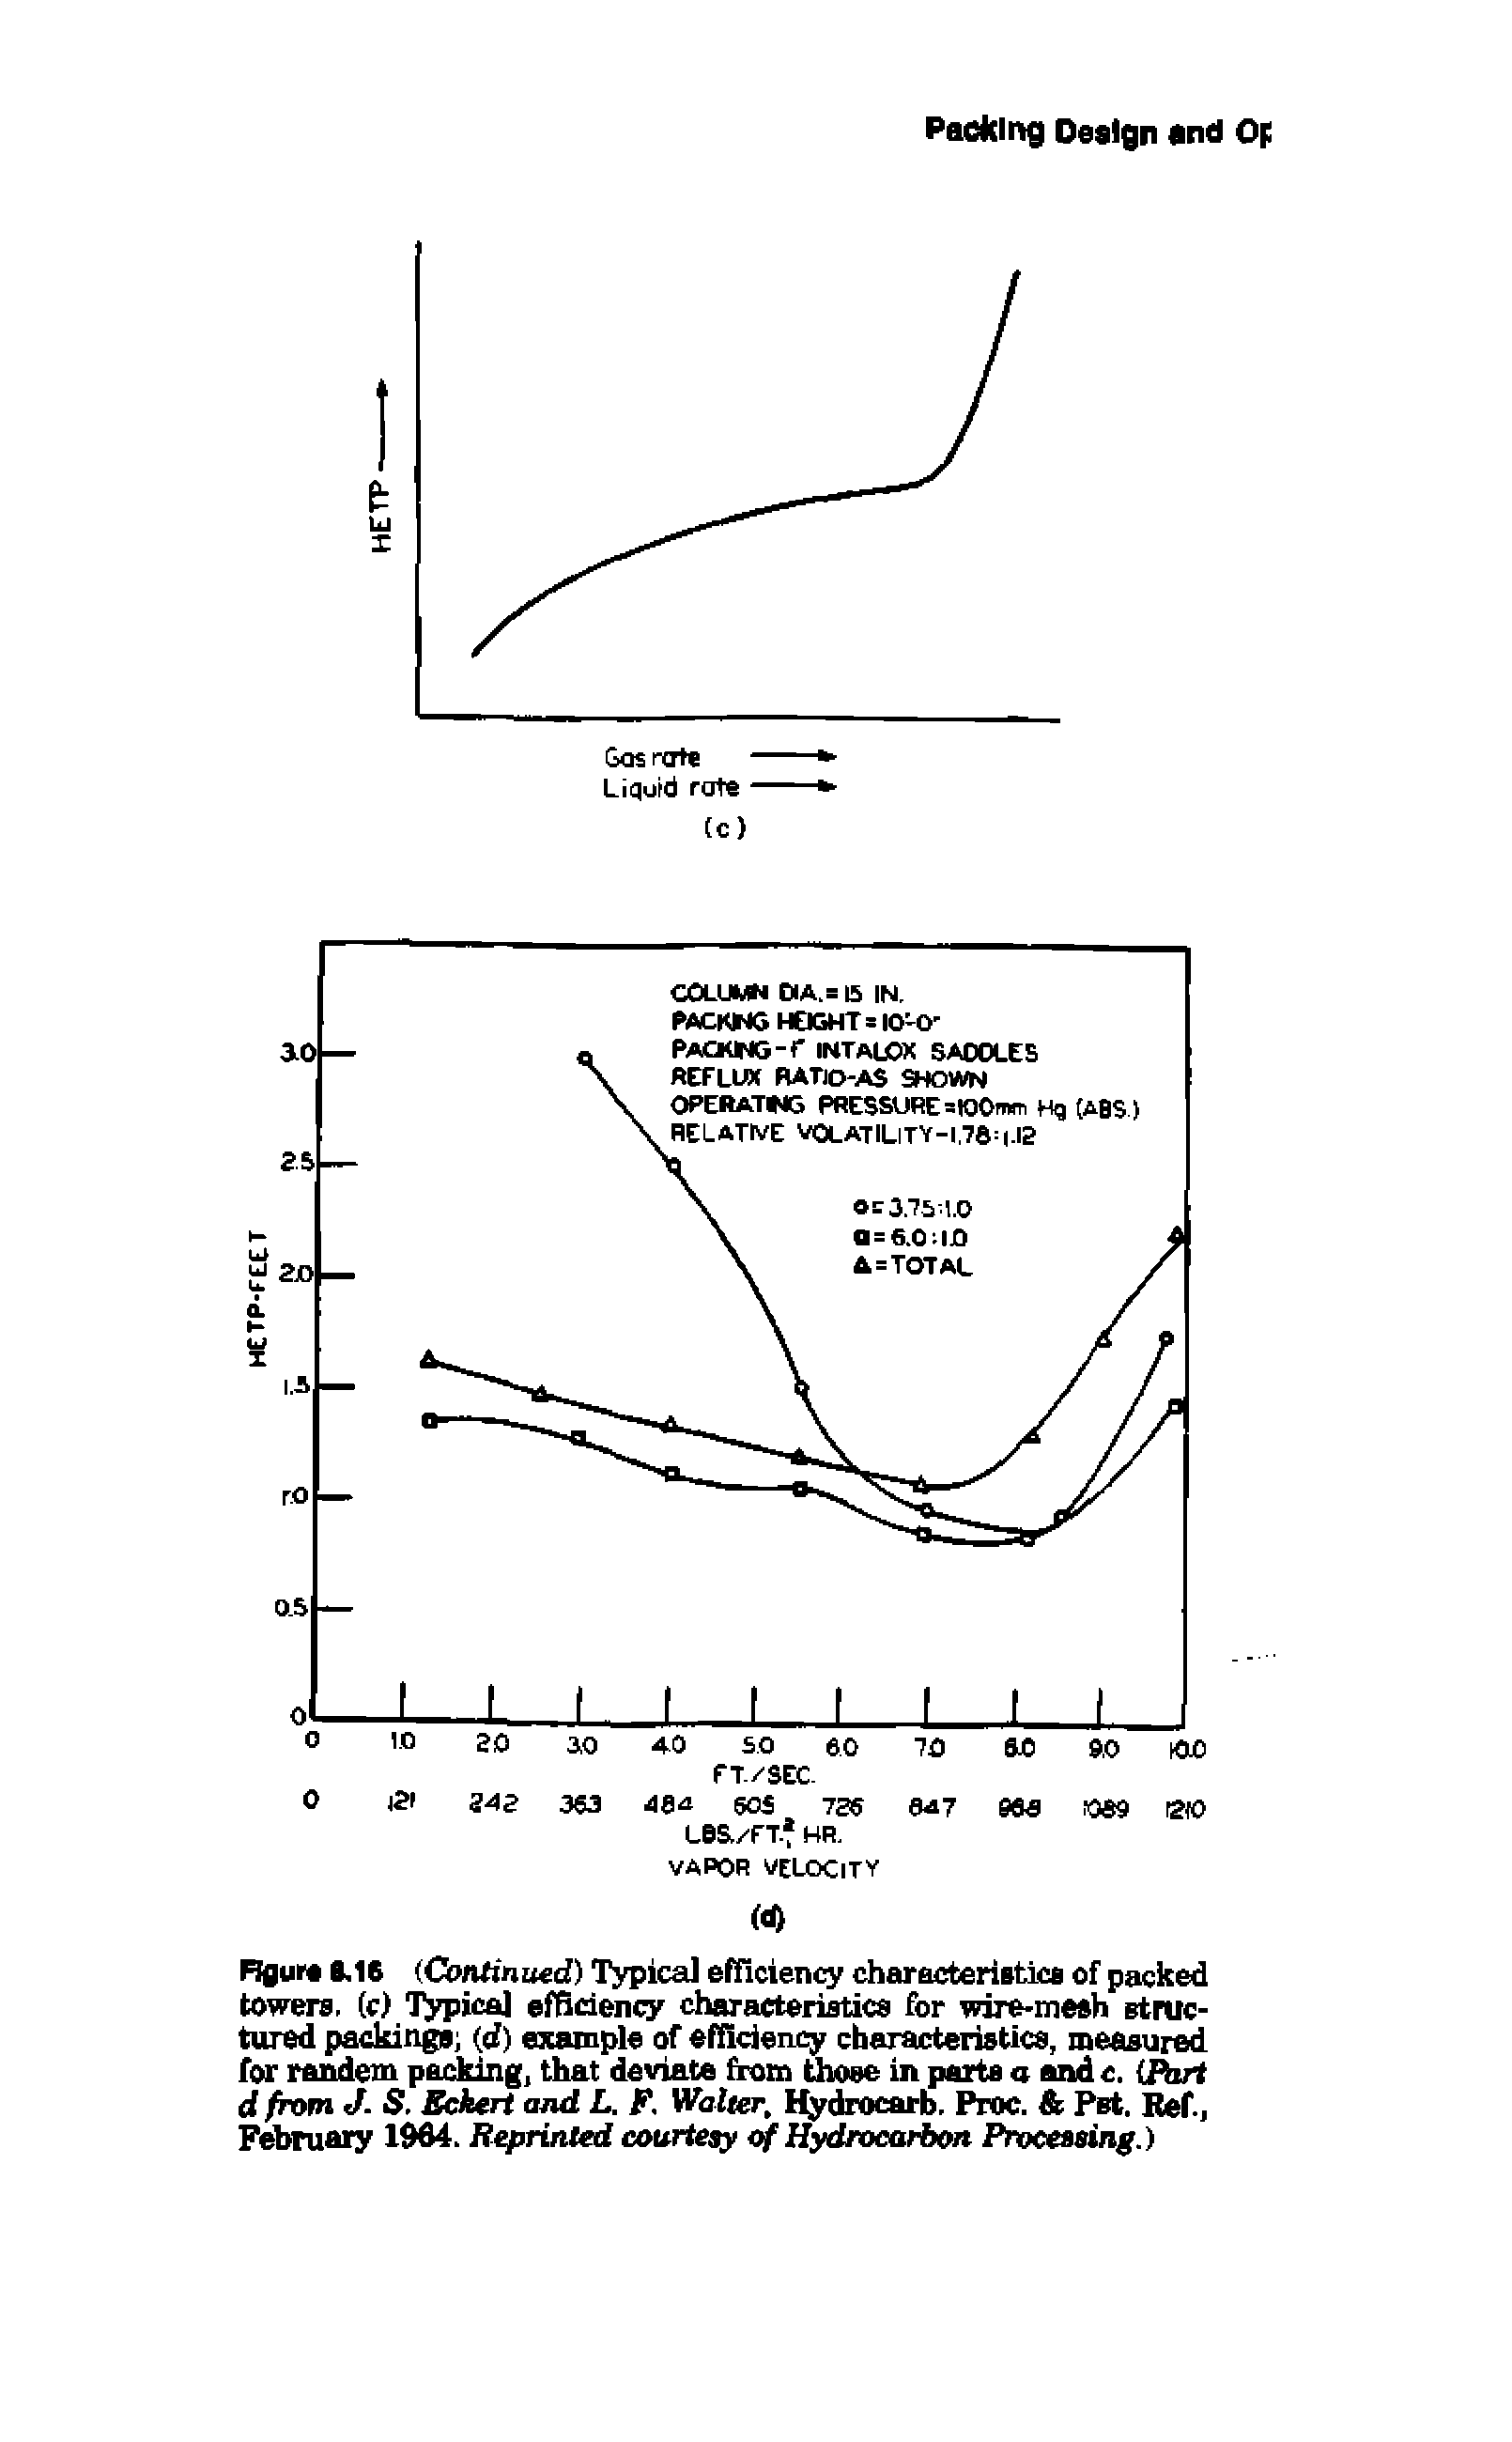 Figure 8.16 (Continued) Typical efficiency characteristics of packed towers, (c) Typical efficiency characteristics for wire-mesh structured packings (d) example of efficiency characteristics, measured for randem packing, that deviate from those in parts a and c. (Fart d from J. S. Eckert and L. F. Walter, Hydrocarb. Proc. Pet. Ref, February 1964. Reprinted courtesy of Hydrocarbon Processing.)...